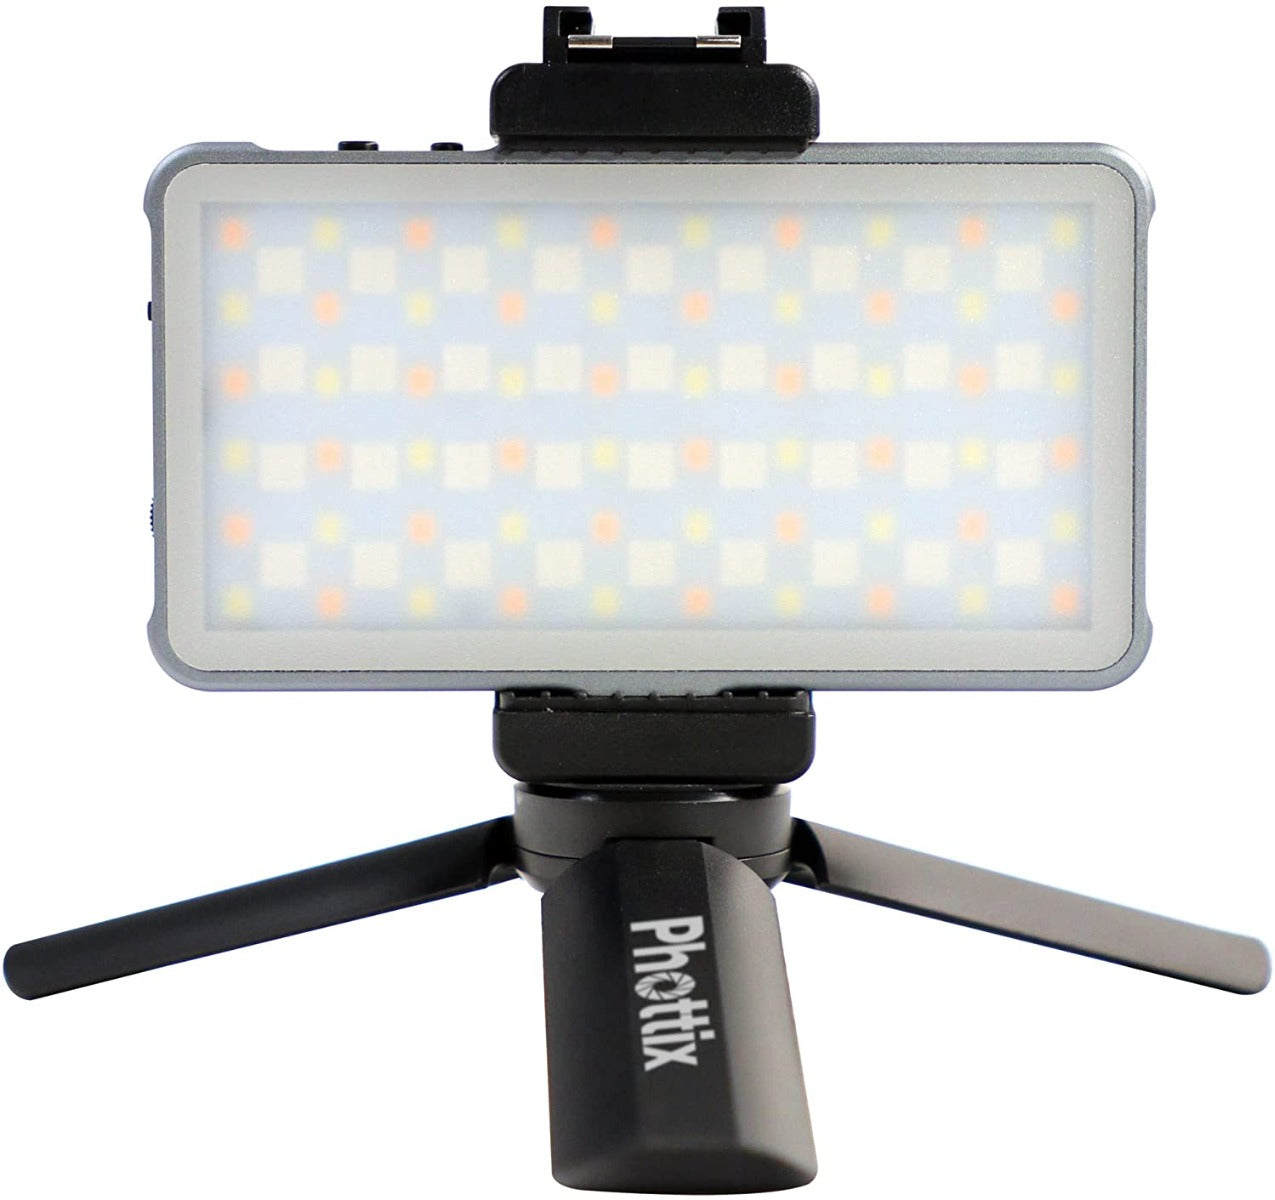 Product Image of Phottix M100R RGB LED Light for mobile phones and cameras